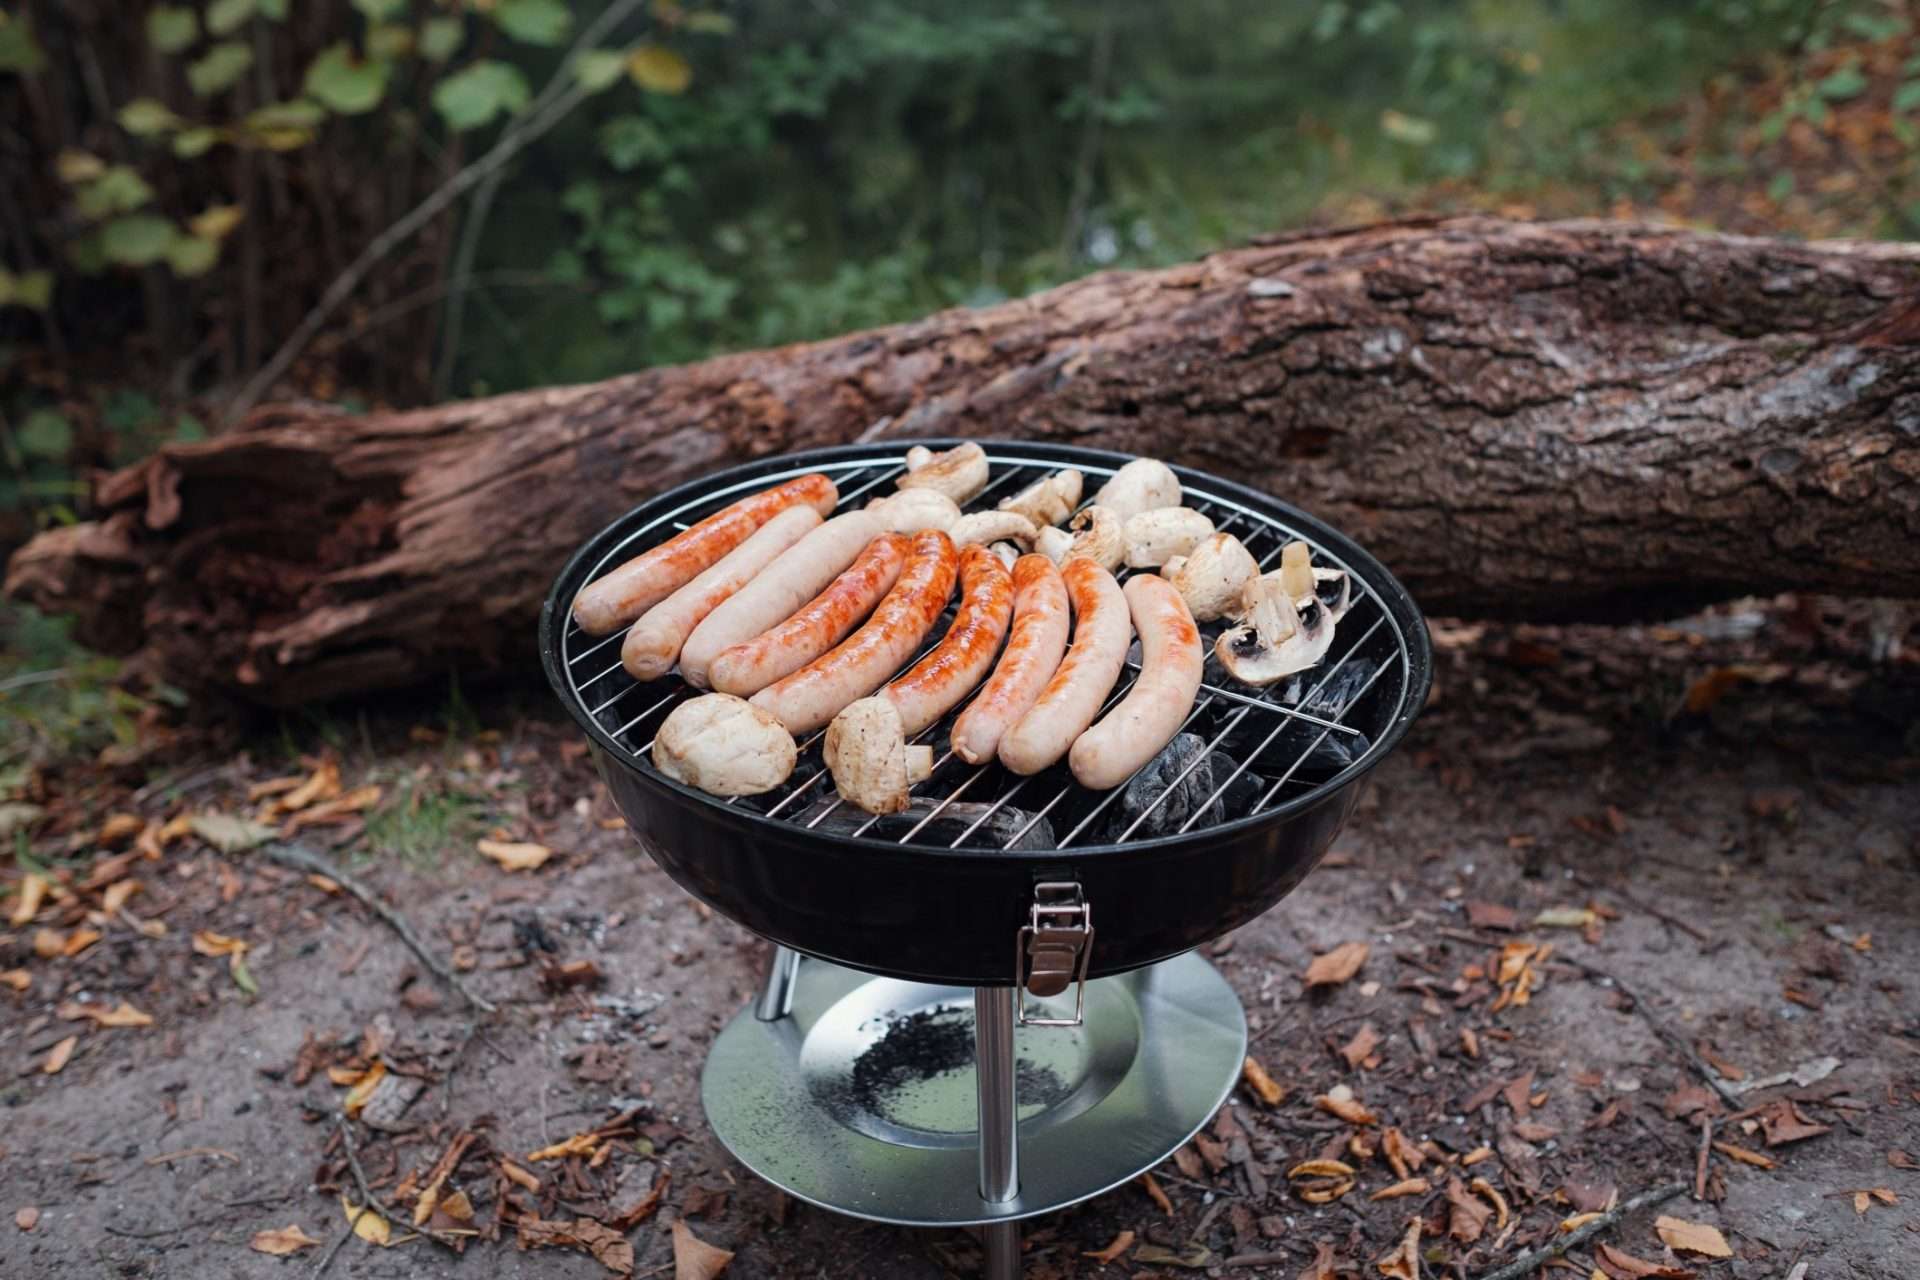 Bratwursts and mushrooms being cooked on a portable grill.